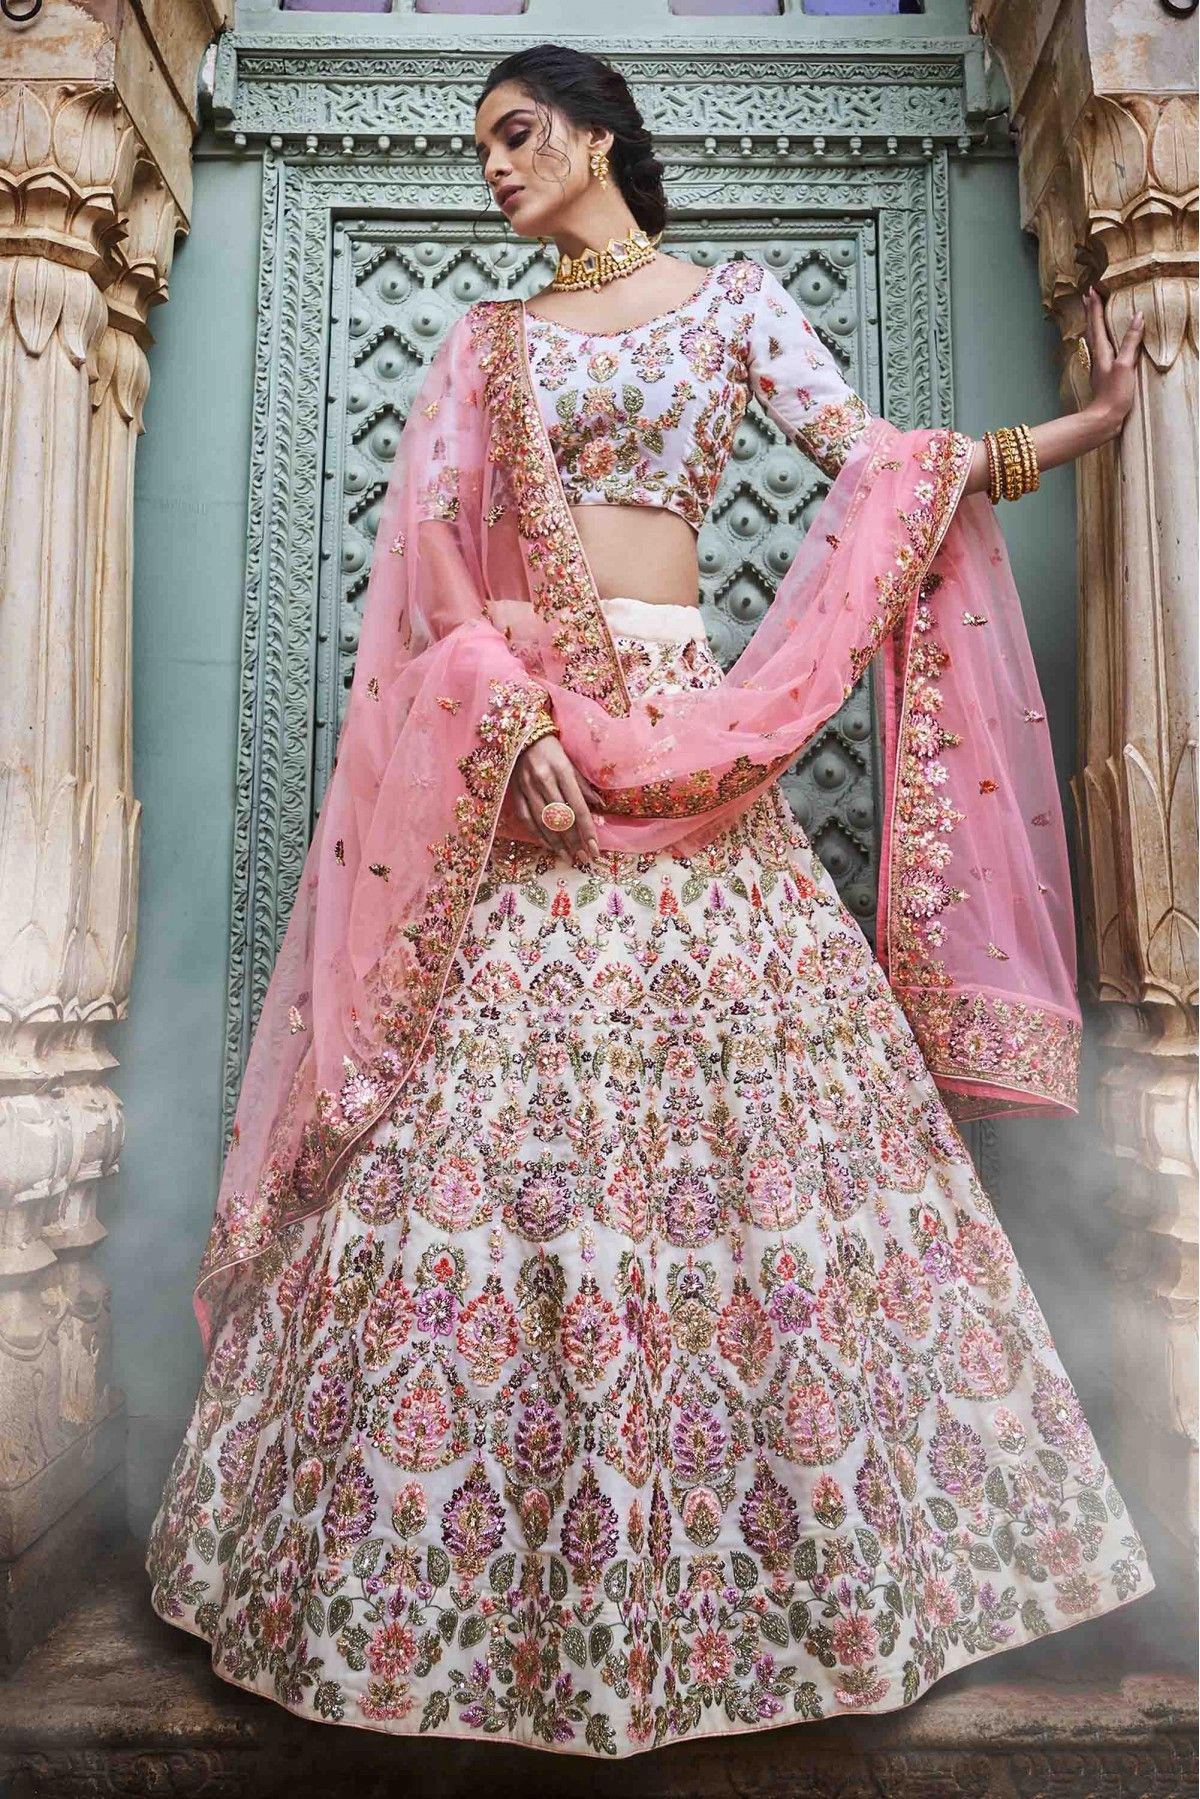 Technicolour Bridal Outfits Are Trending & How! | Indian dresses, Indian  bridal dress, Bridal outfits